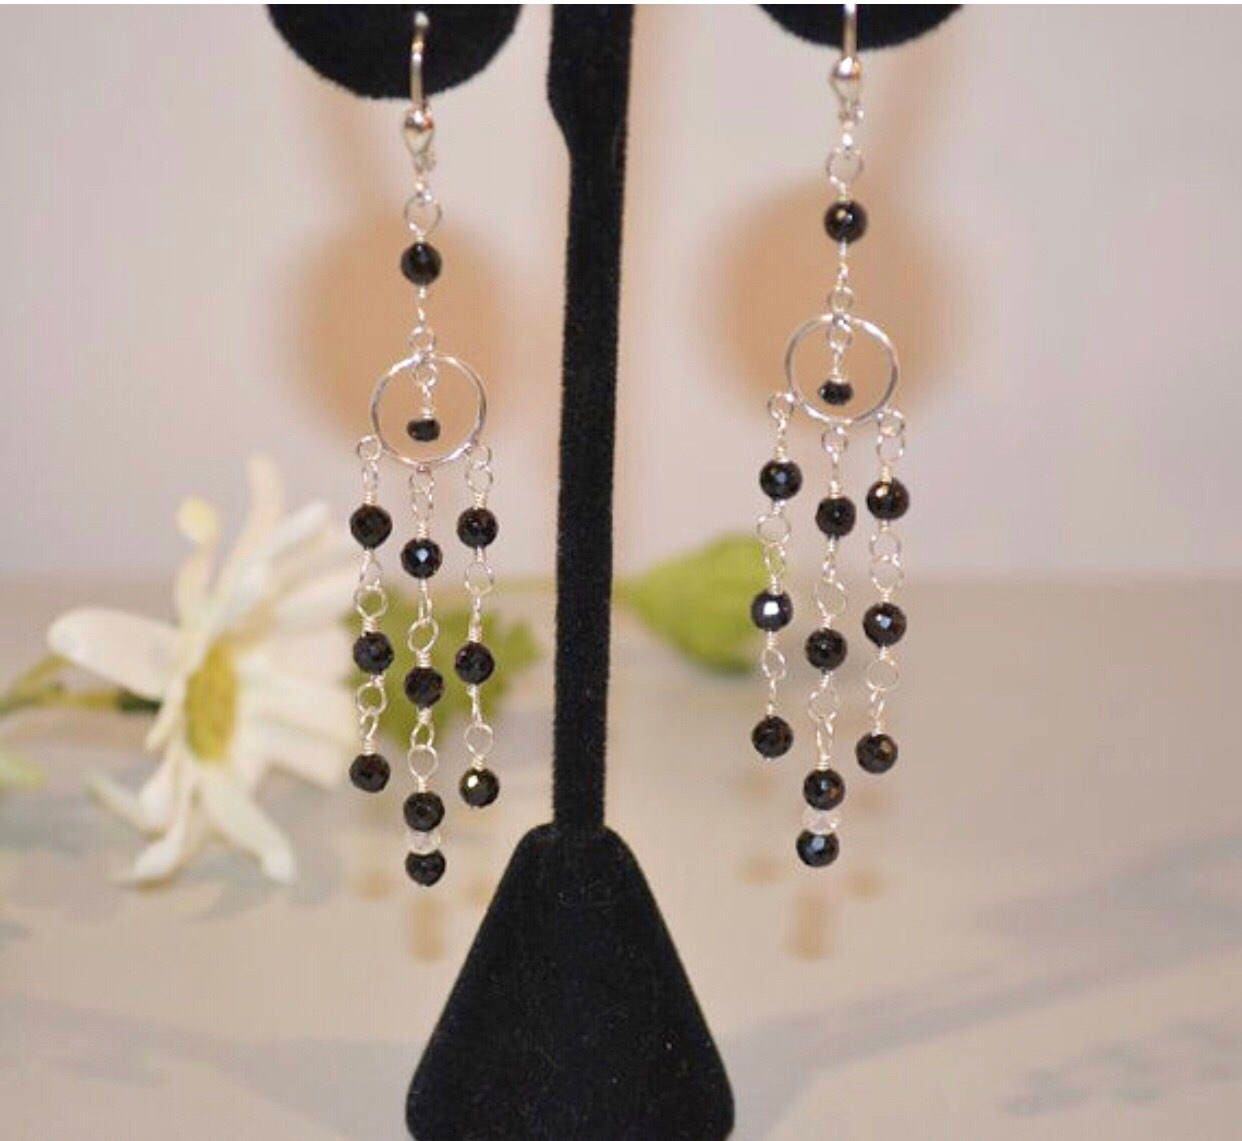 As Gifted to Celebrities Black Spinel Chandelier Earrings | Etsy